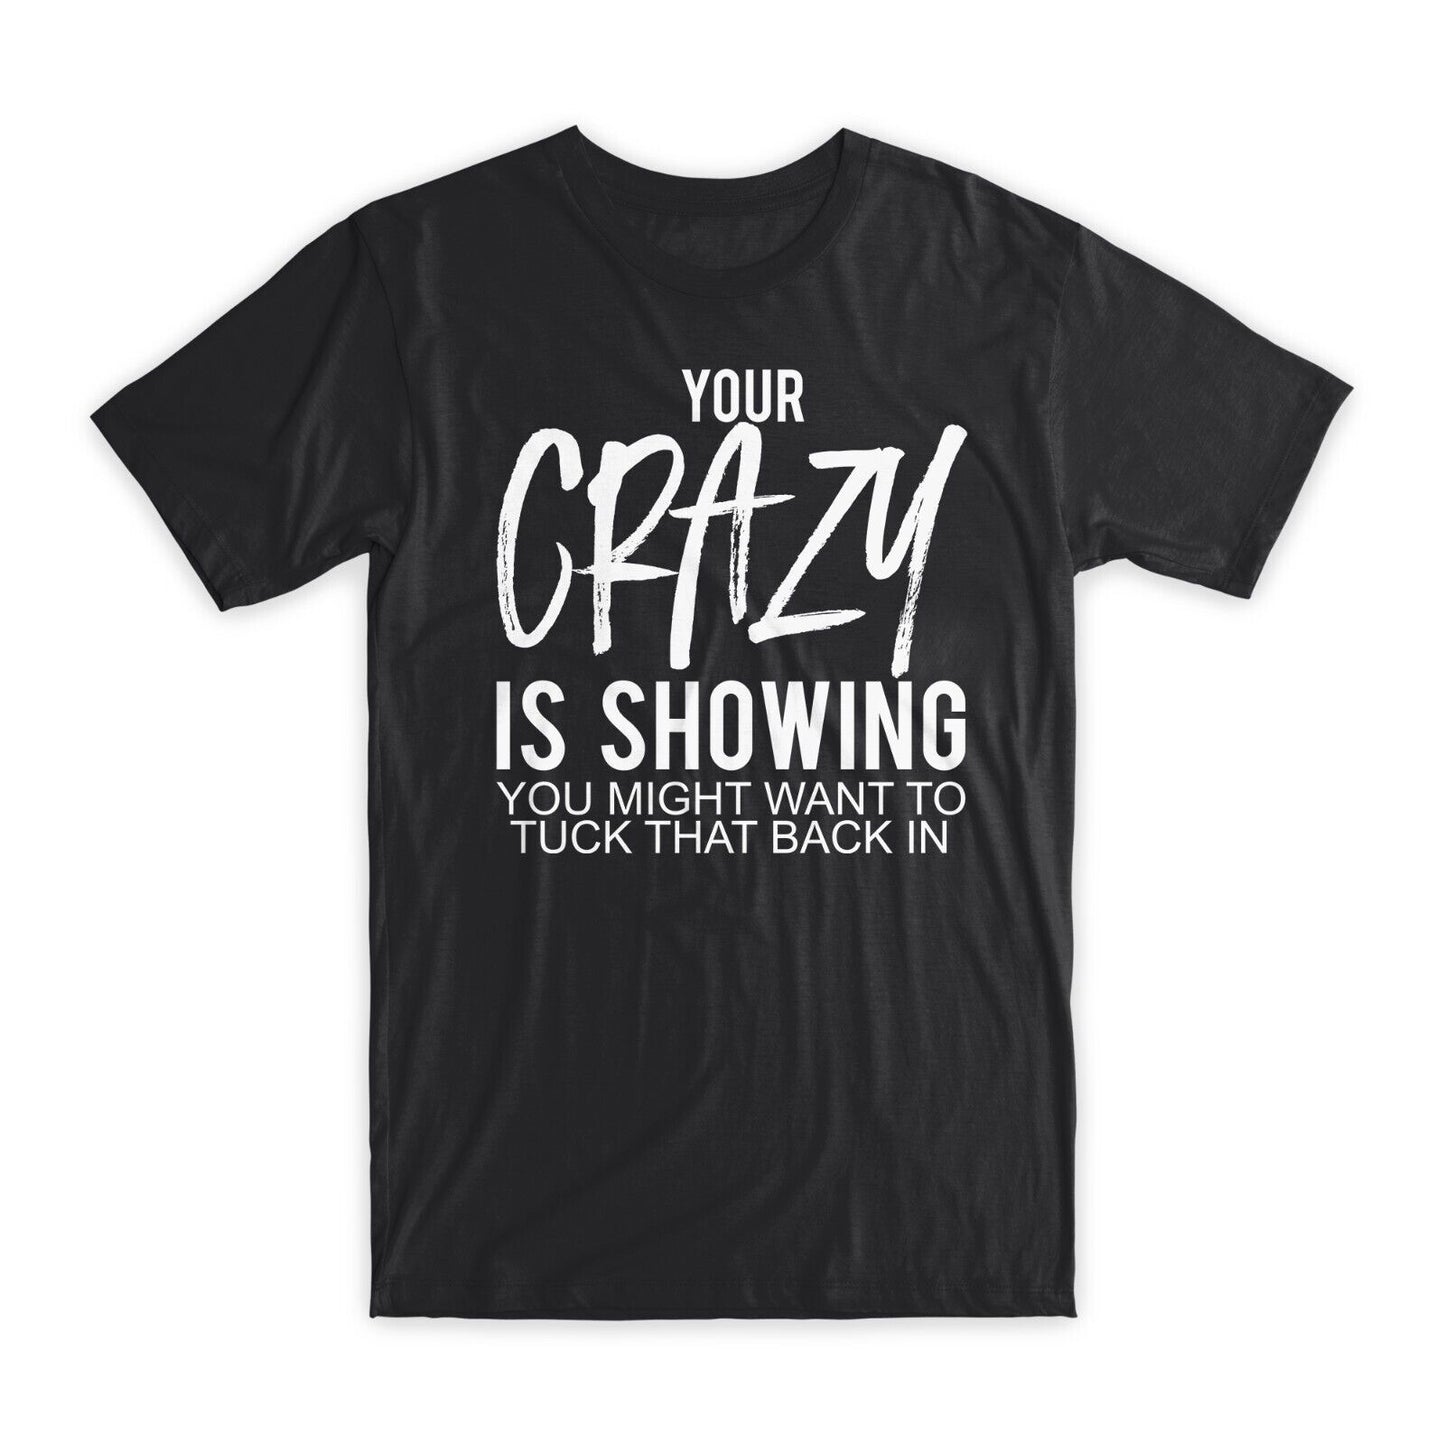 Your Crazy is Showing T-Shirt Premium Soft Cotton Crew Neck Funny Tees Gifts NEW